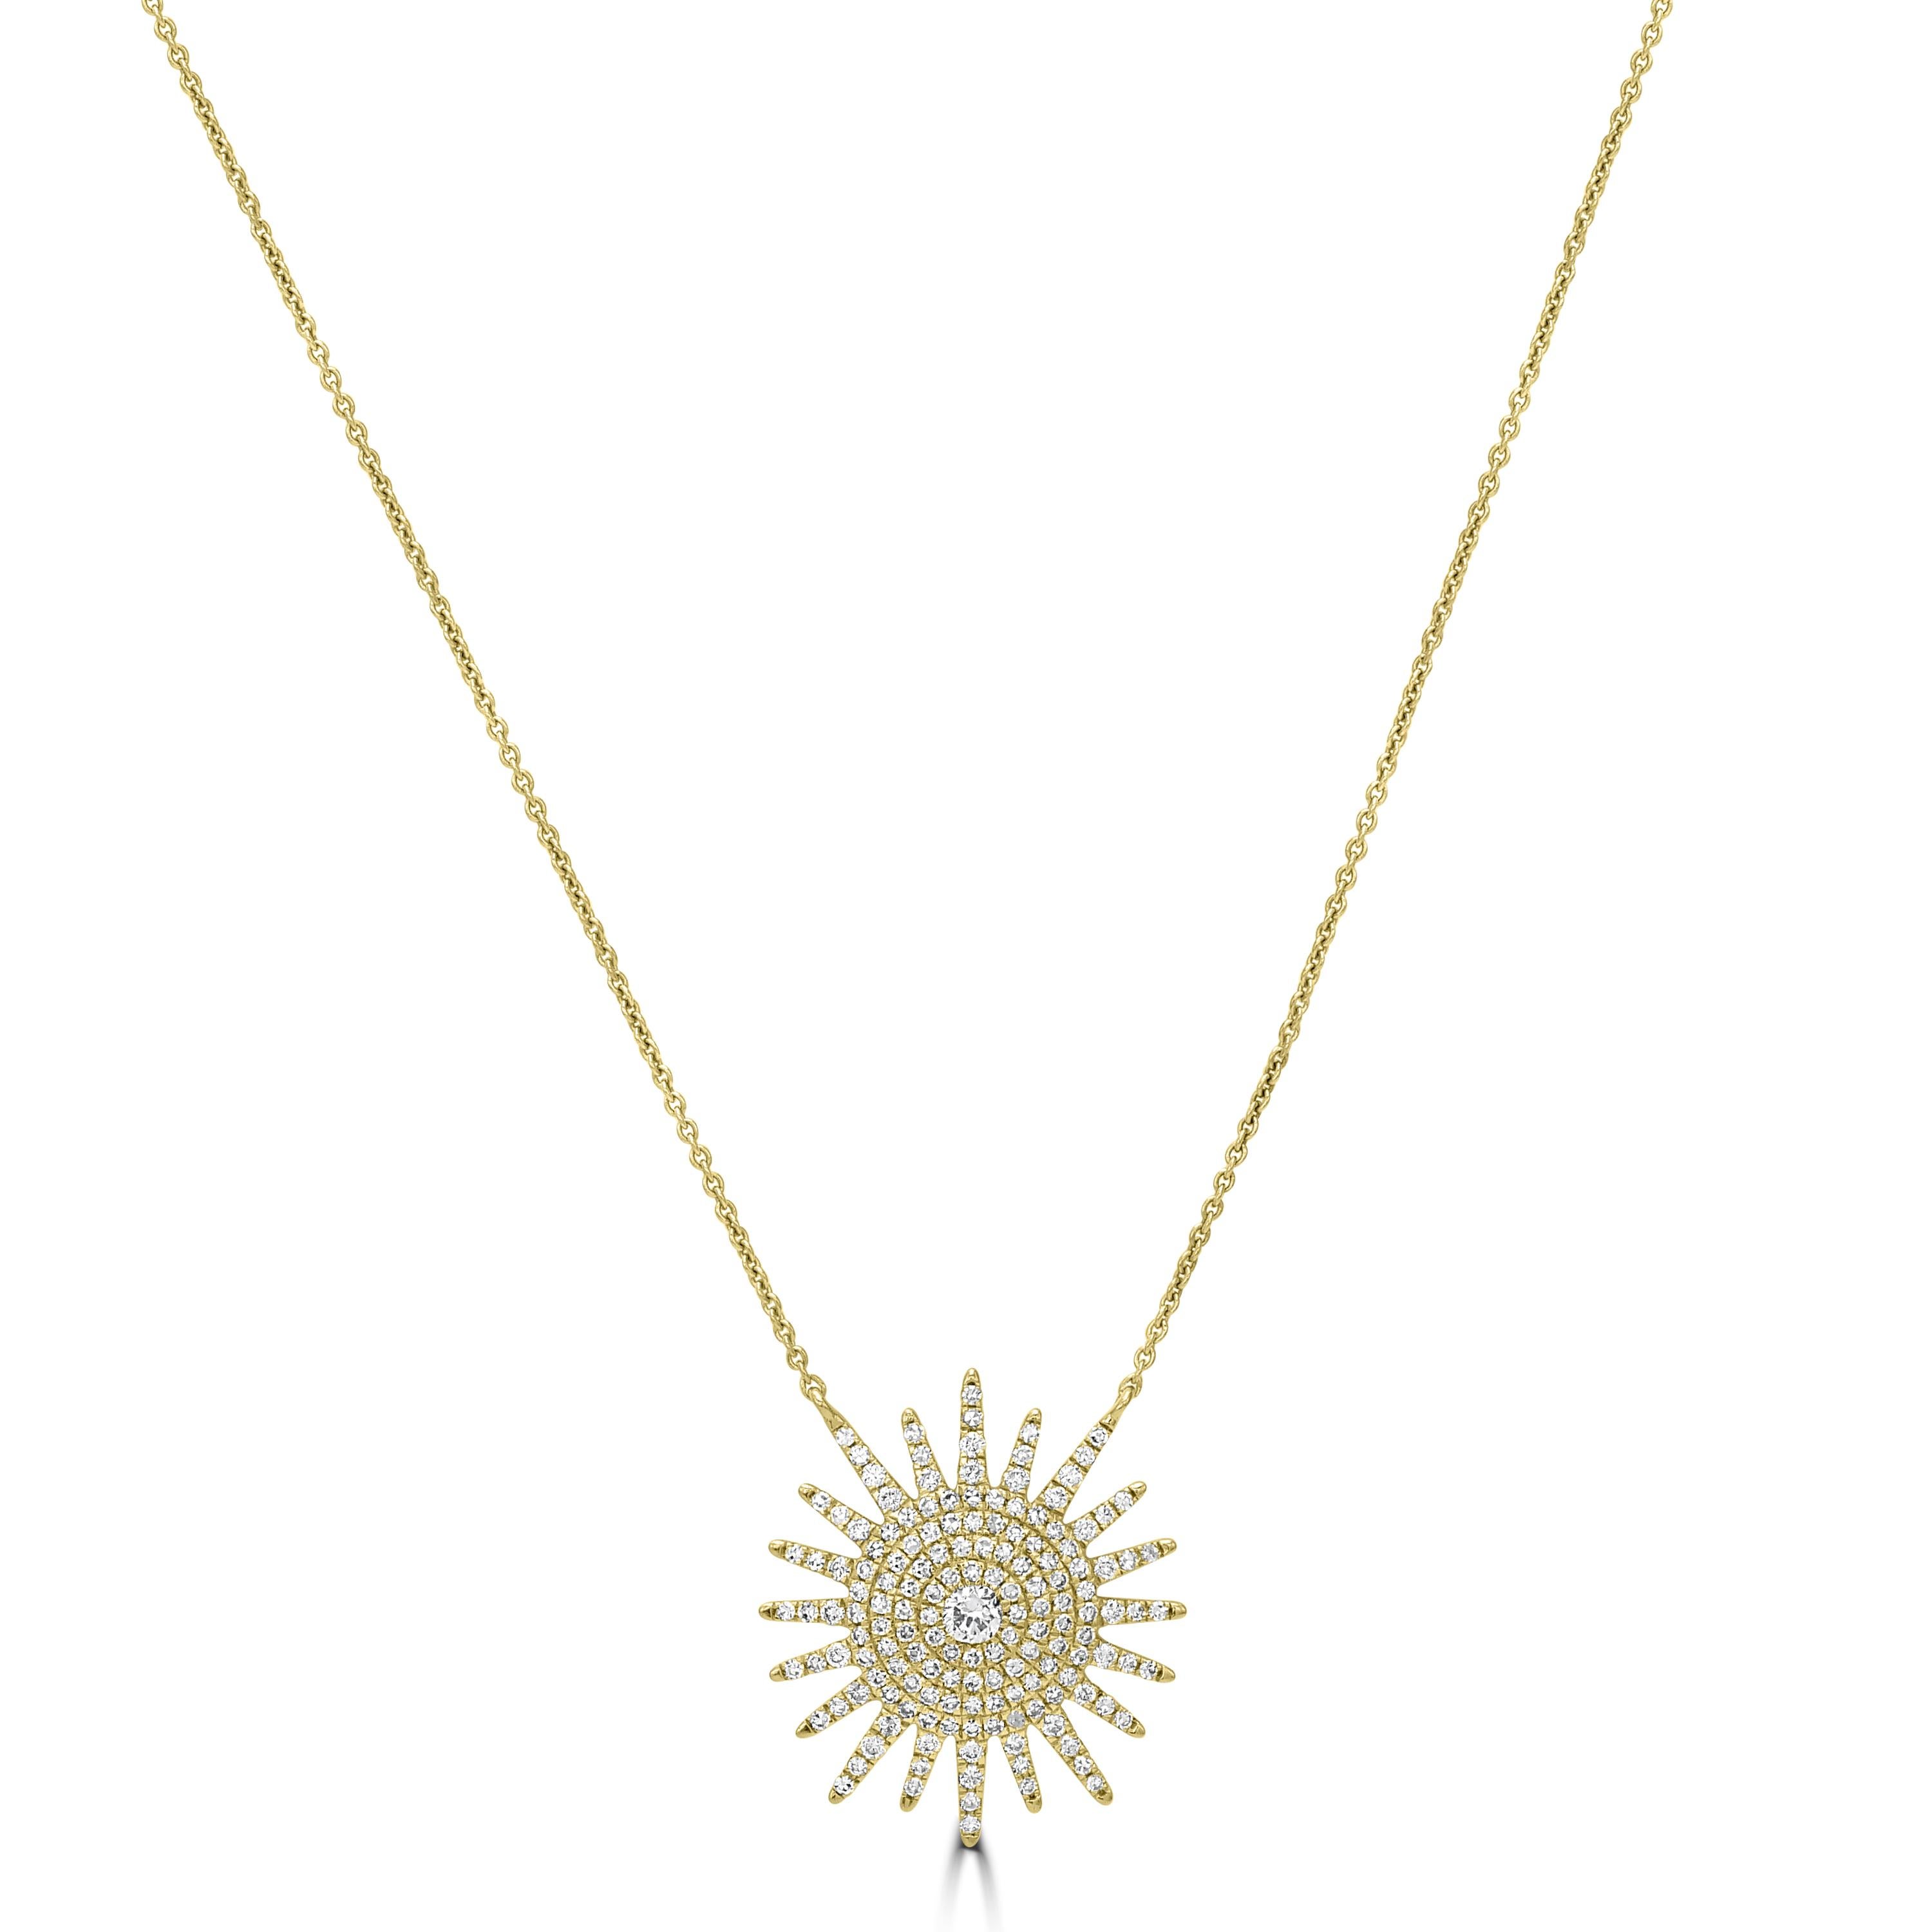 You're sure to shine whenever you wear this Luxle 14k gold diamond starburst pendant. Featuring 0.55 carats of round full-cut diamonds in starburst pendant set in 14K yellow gold . This pendant necklace, which hangs from a gold rolo chain, is